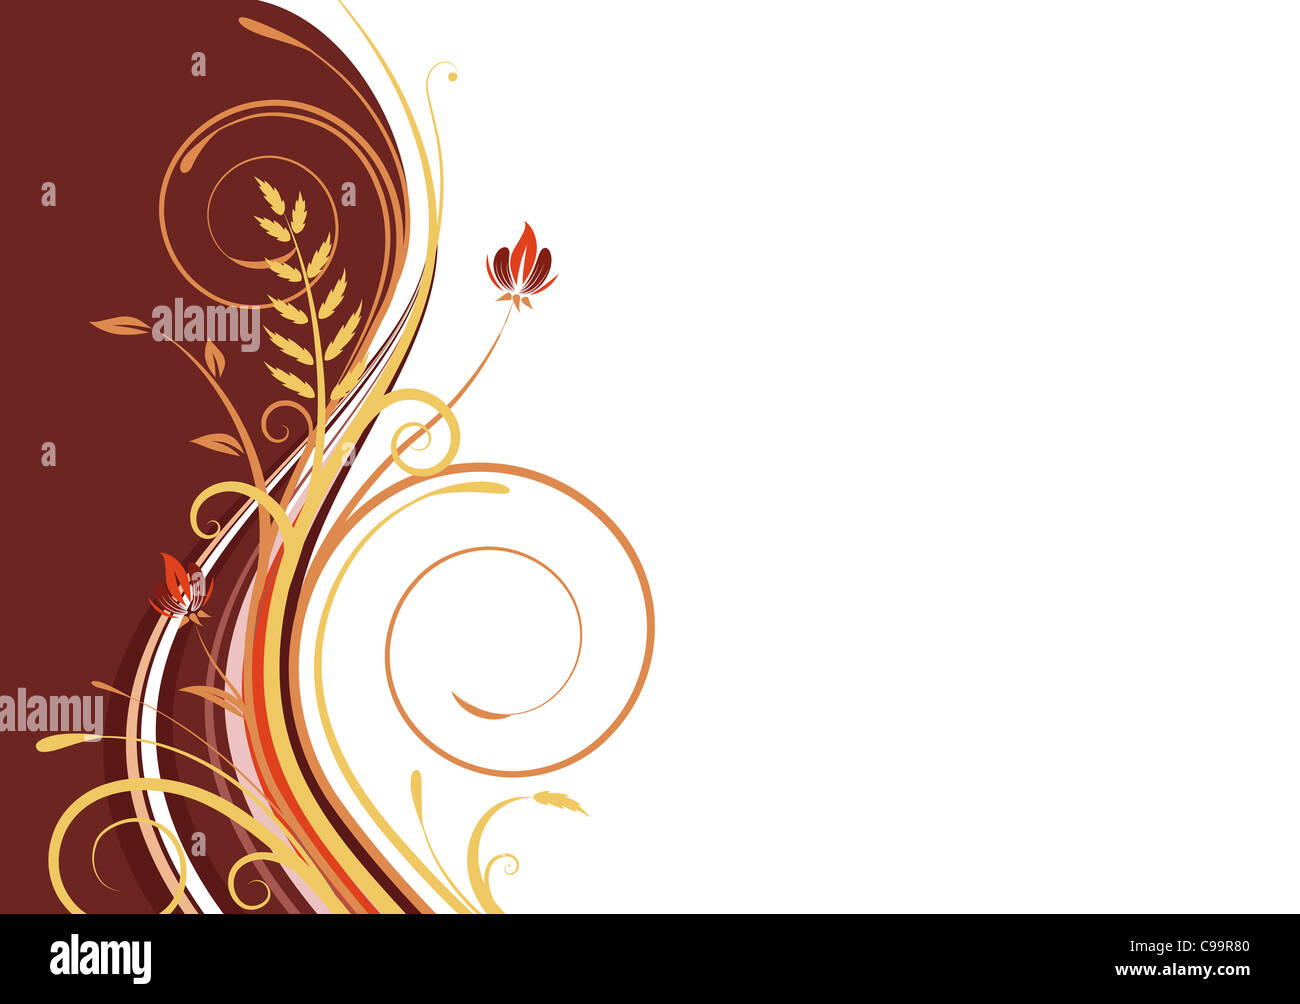 Illustration de brown floral style abstract background Banque D'Images